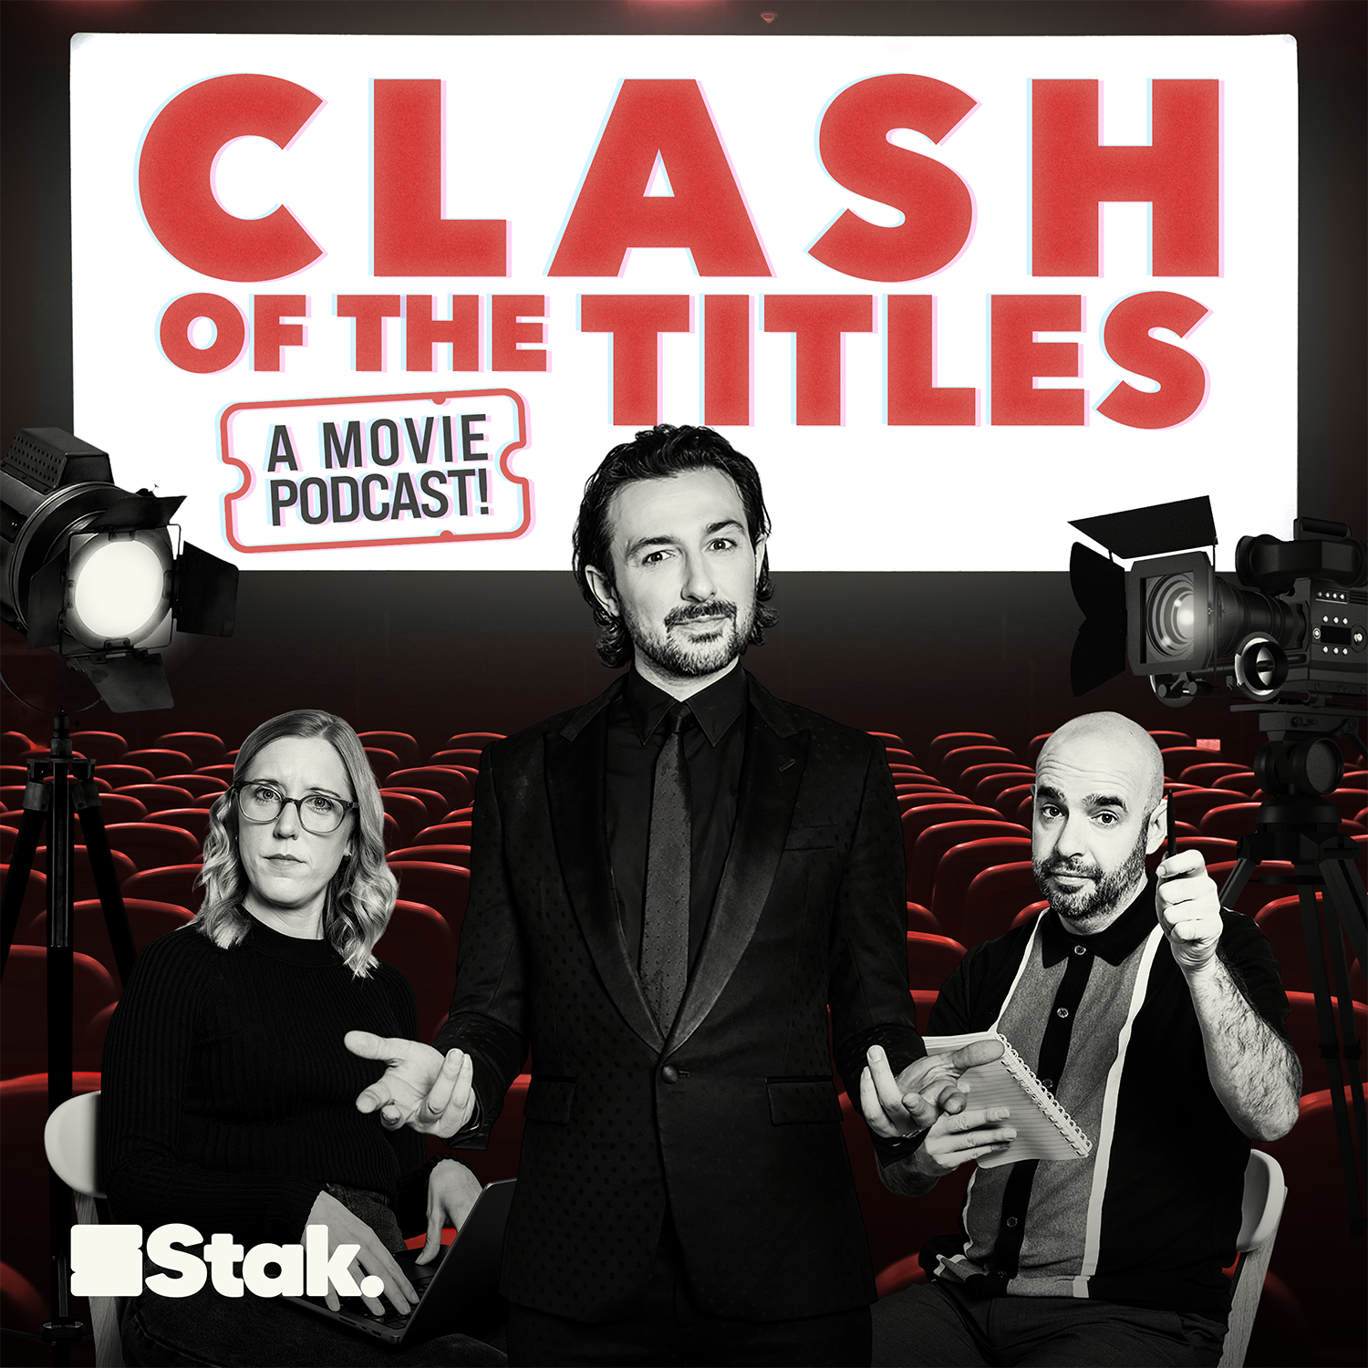 The artwork for the Clash Of The Titles - a movie podcast! podcast.